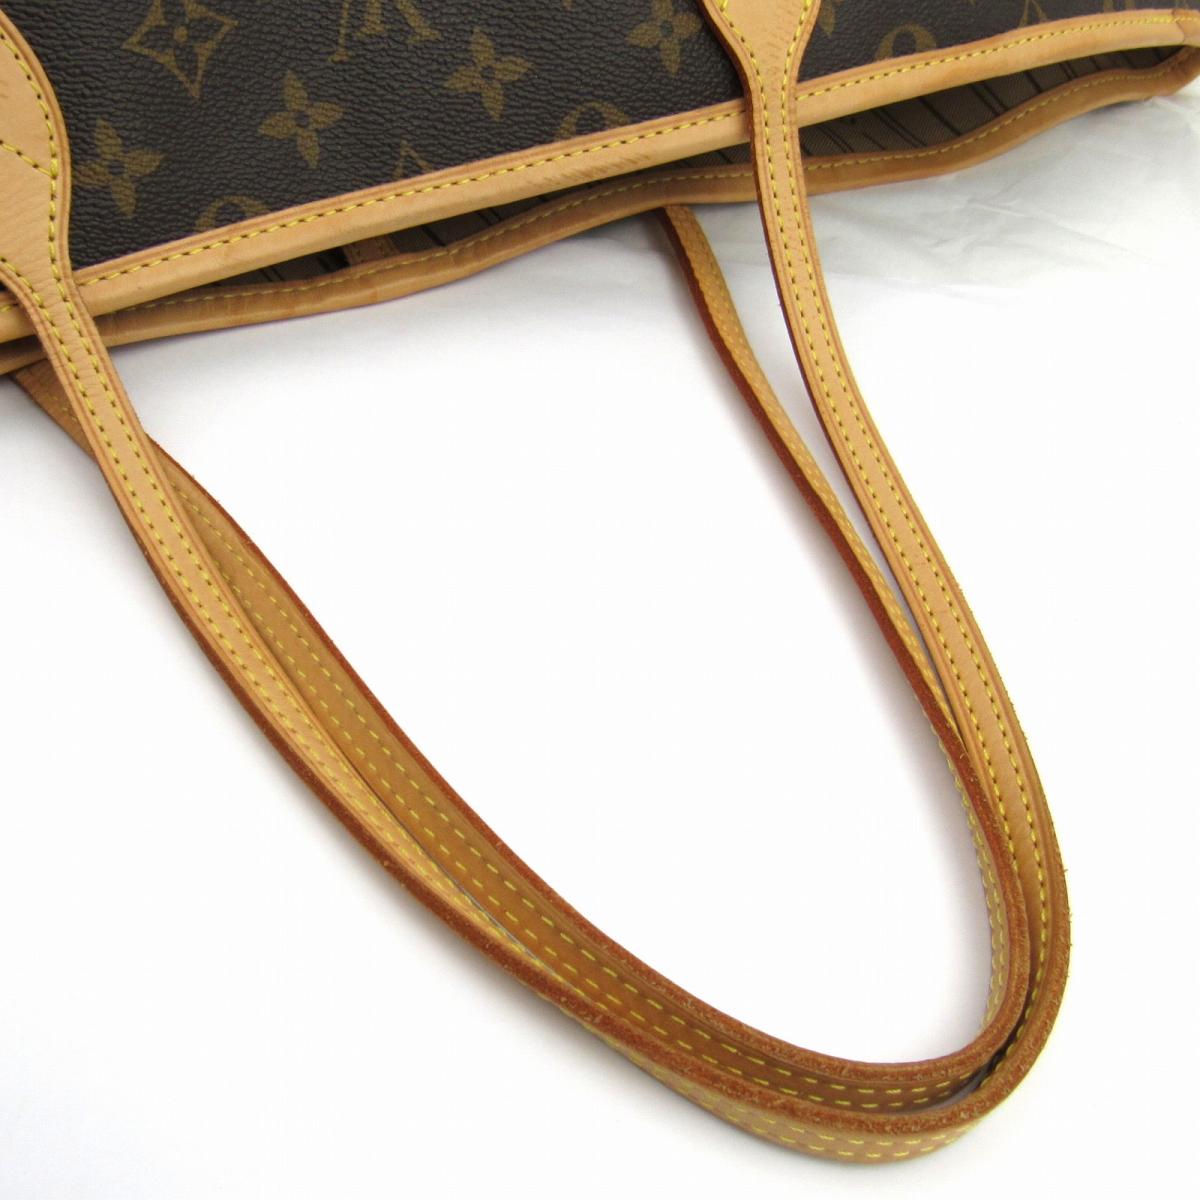 BRANDOFF GINZA: Auth LOUIS VUITTON Neverfull GM Shoulder Tote Bag M40157 Monogram Used Vintage ...